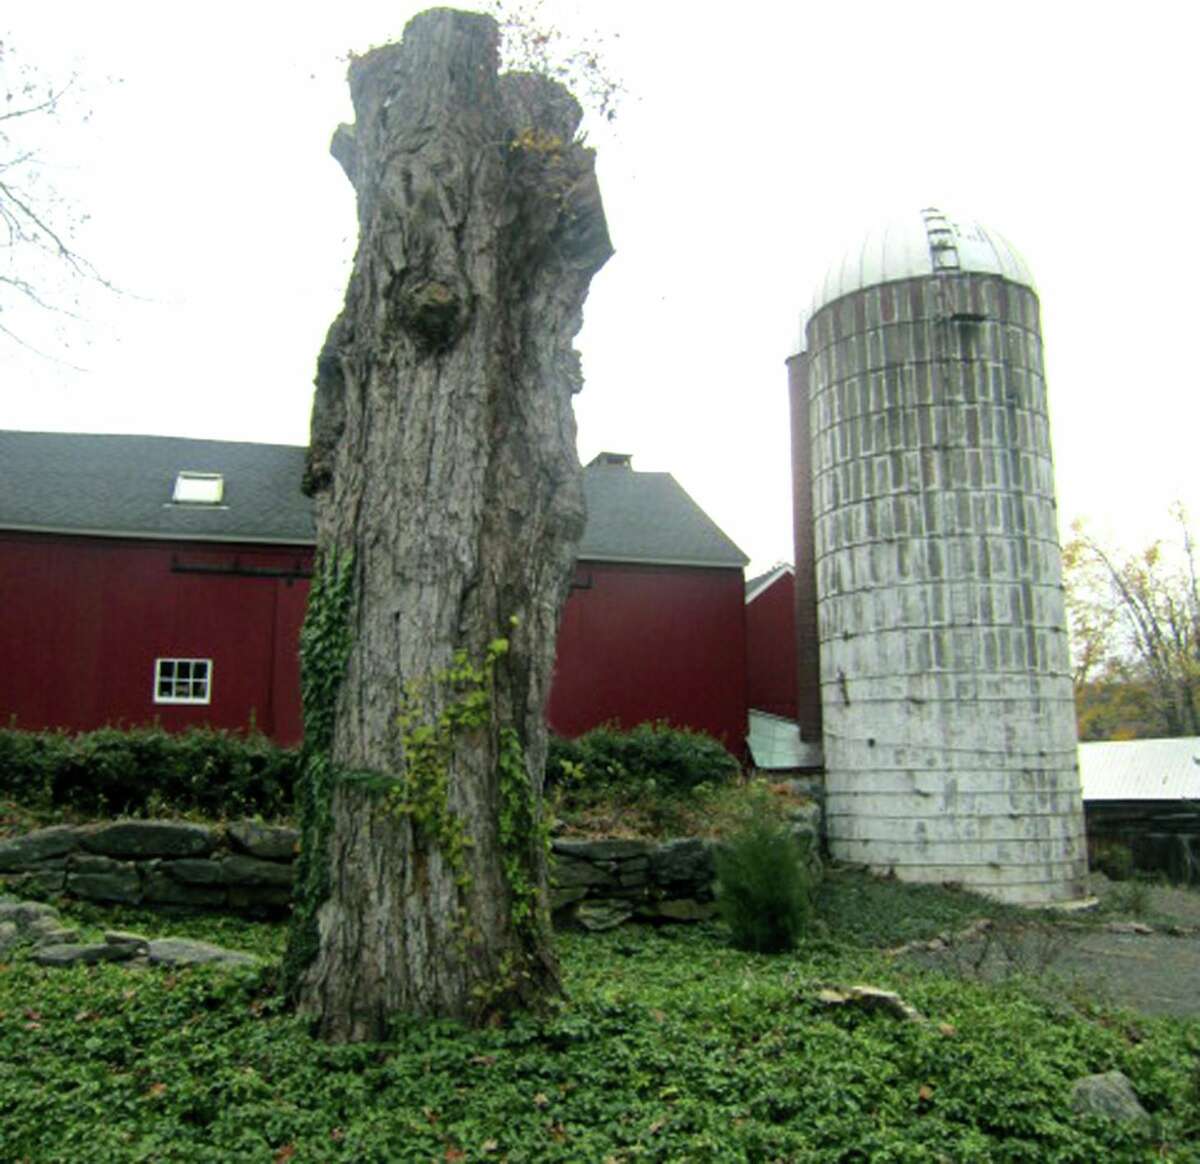 The Silo is the historic centerpiece at Hunt Hill Farm, located in the Northville district of New Milford. October 2012